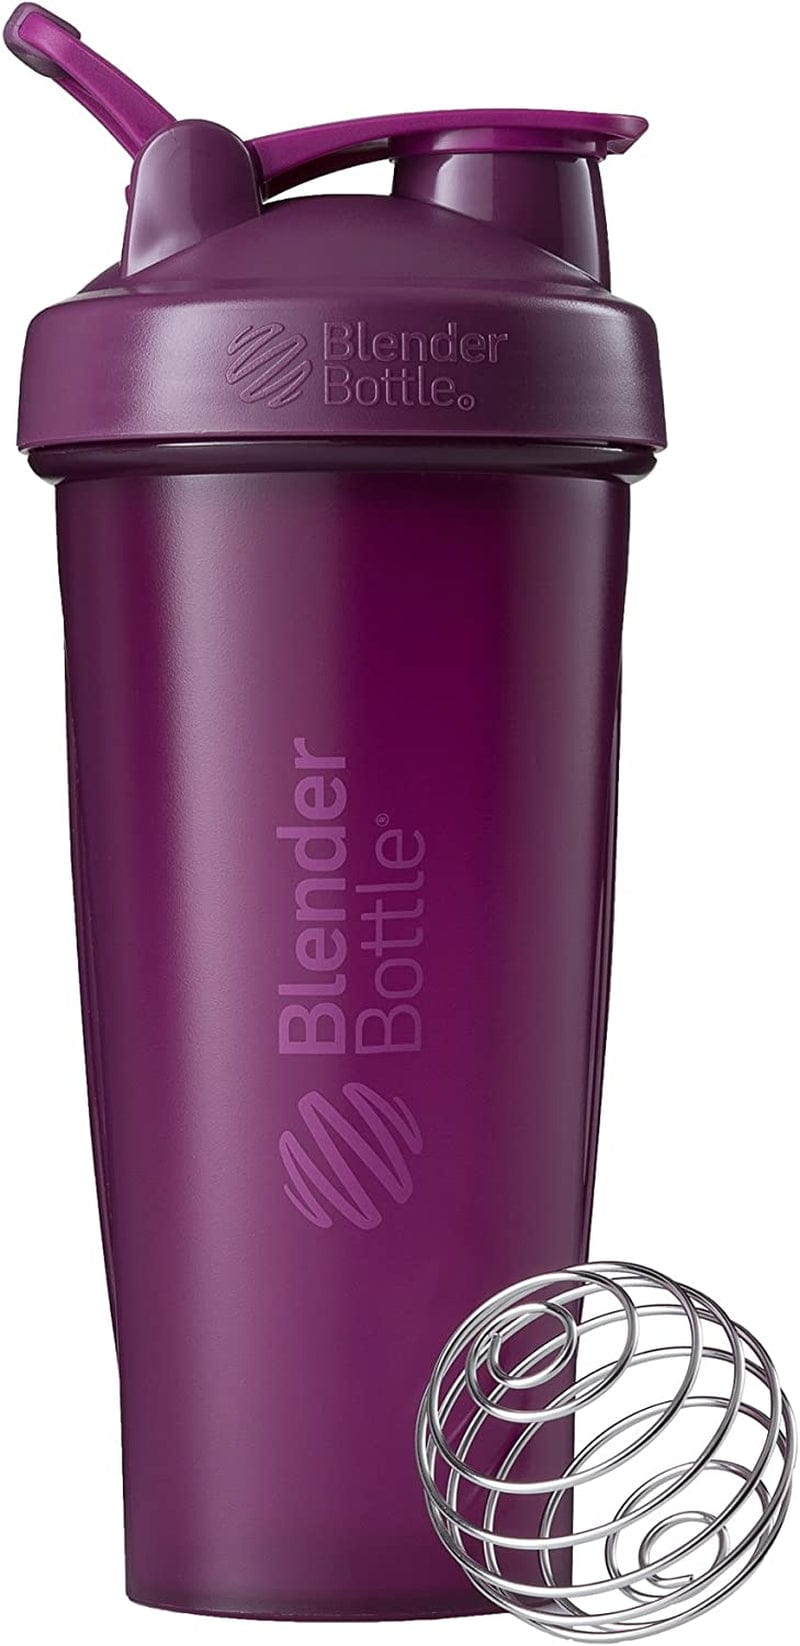 Blenderbottle Classic Shaker Bottle Perfect for Protein Shakes and Pre Workout, 20-Ounce, Clear/Black/Black & Classic V2 Shaker Bottle Perfect for Protein Shakes and Pre Workout, 28-Ounce, Black Home & Garden > Kitchen & Dining > Barware BlenderBottle Plum Bottle 28-Ounce